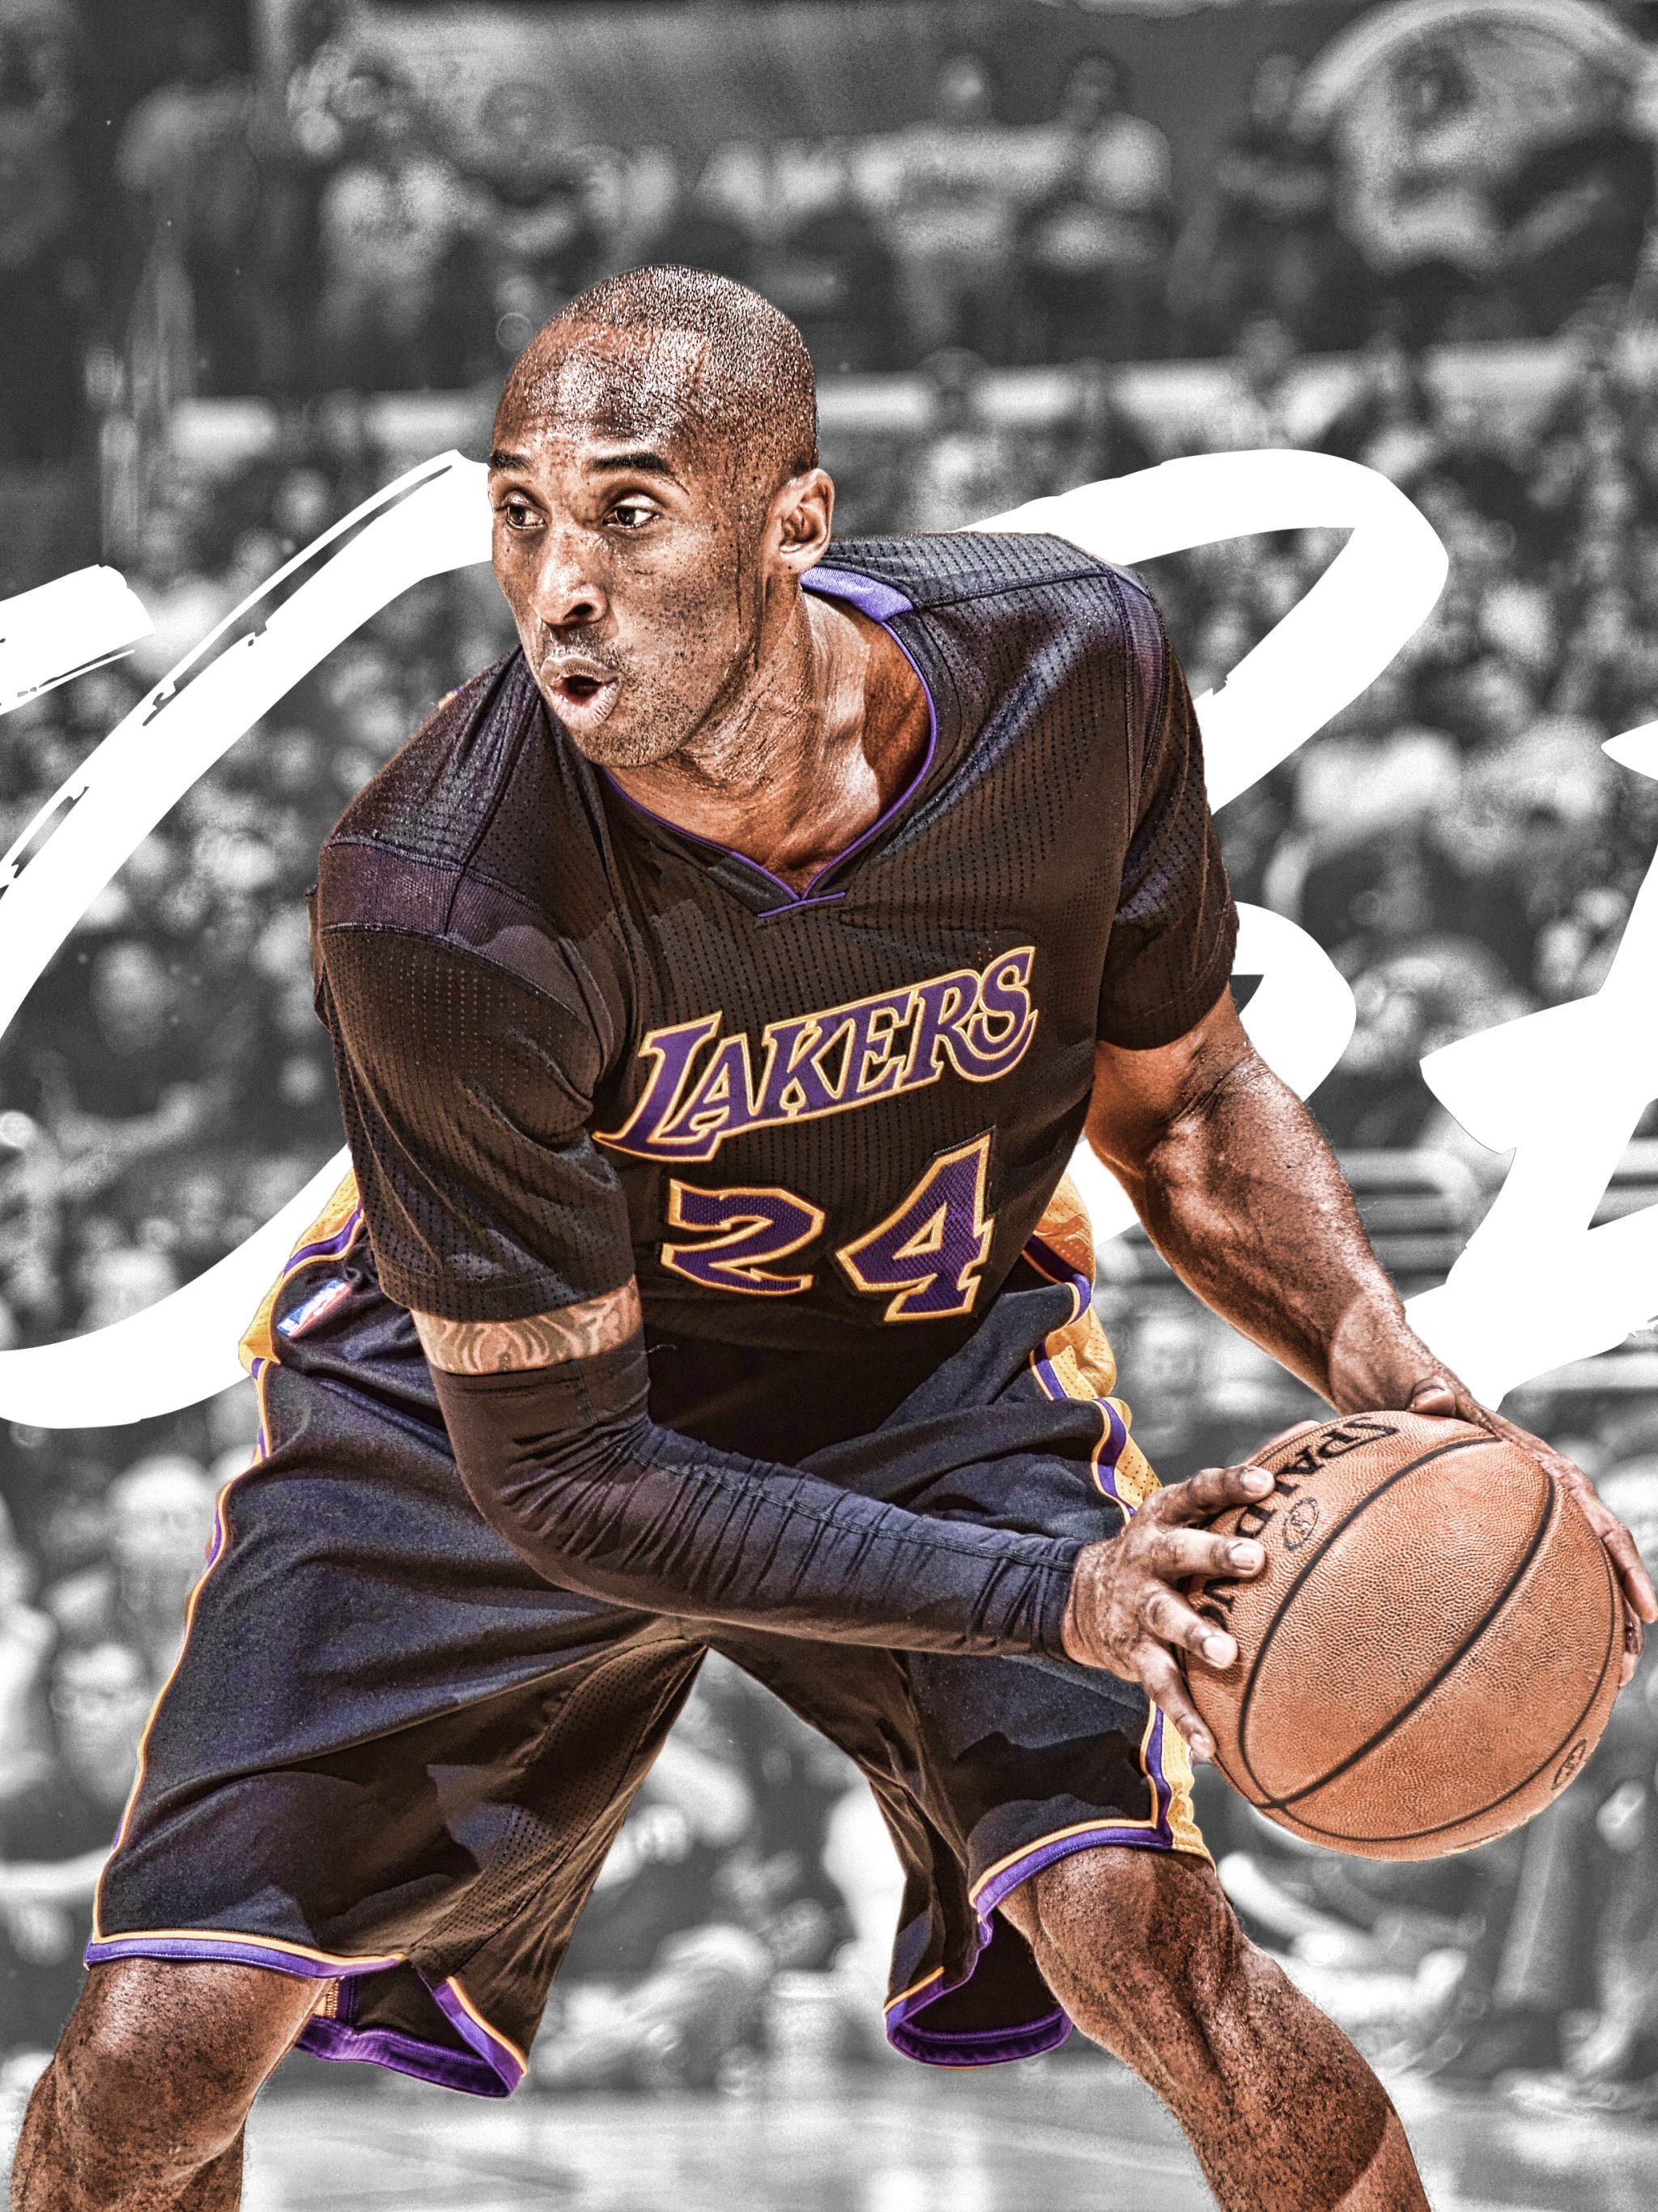 Kobe Bryant 2016 wallpaper for iPhone 6 plus and other iPhone devices.<ref> Kobe Bryant</ref><box>(10,114),(994,992)</box> is an American professional basketball player - Los Angeles Lakers